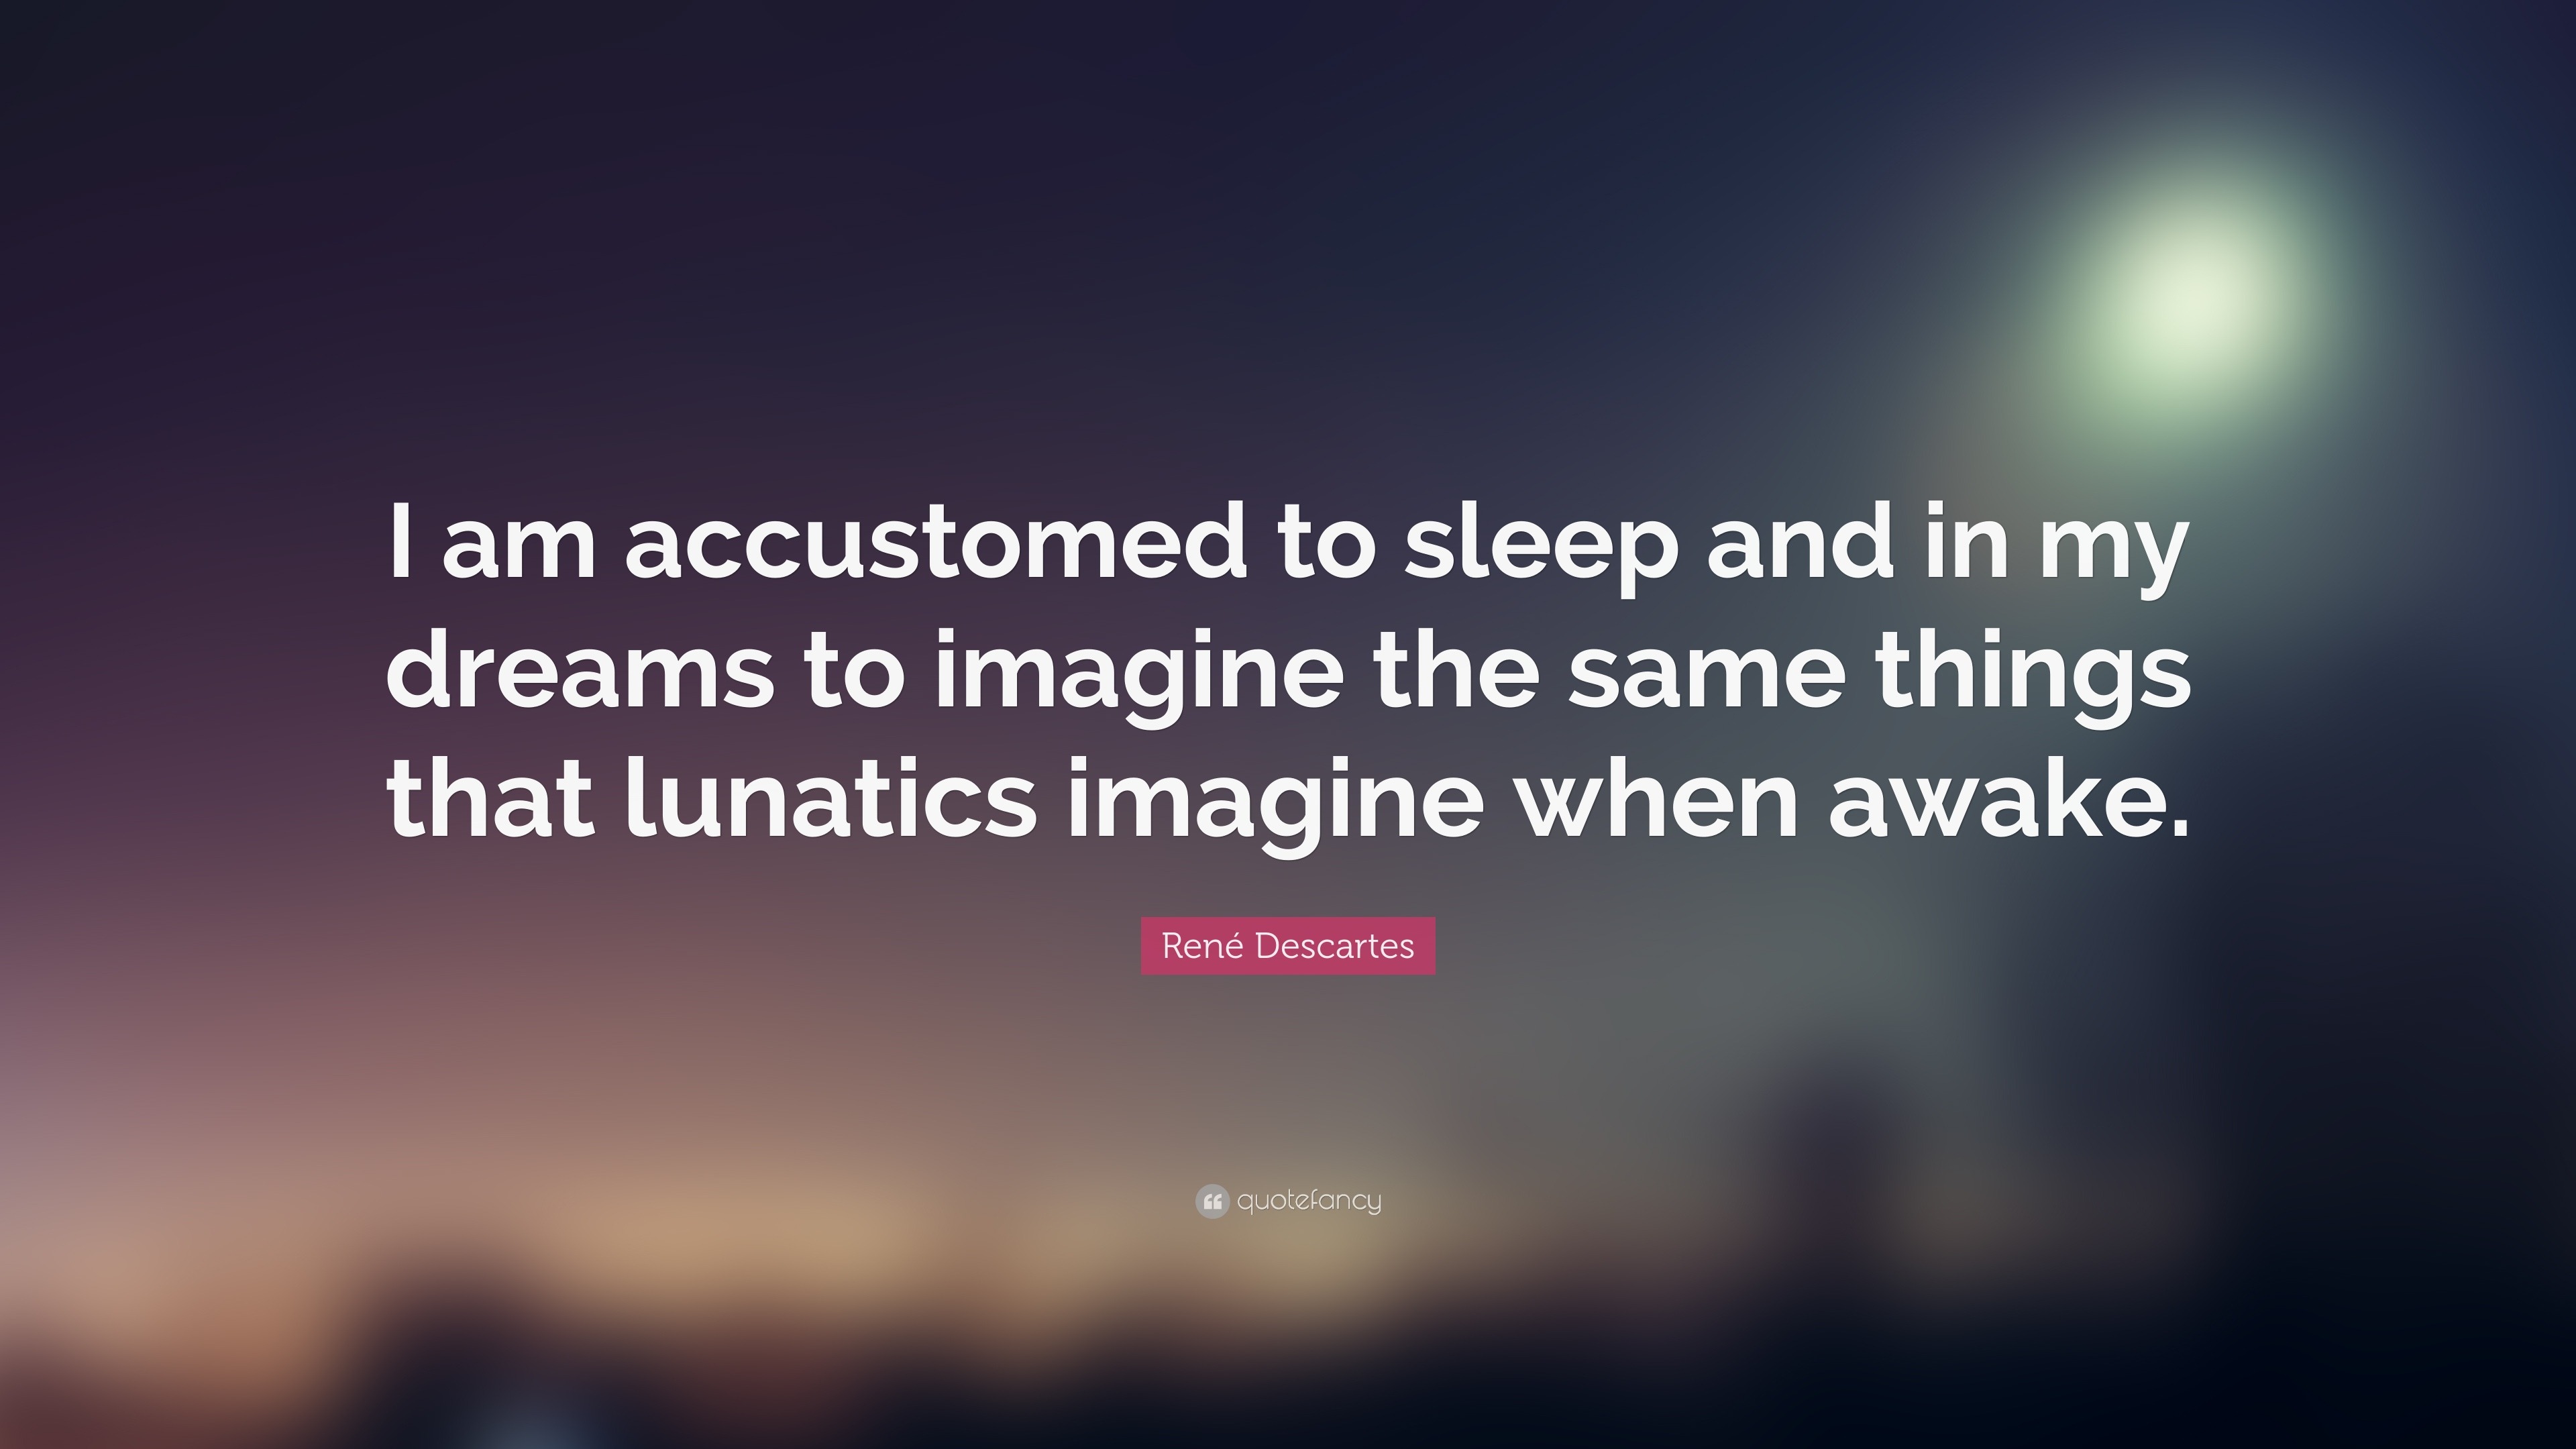 rené descartes quote: "i am accustomed to sleep and in my